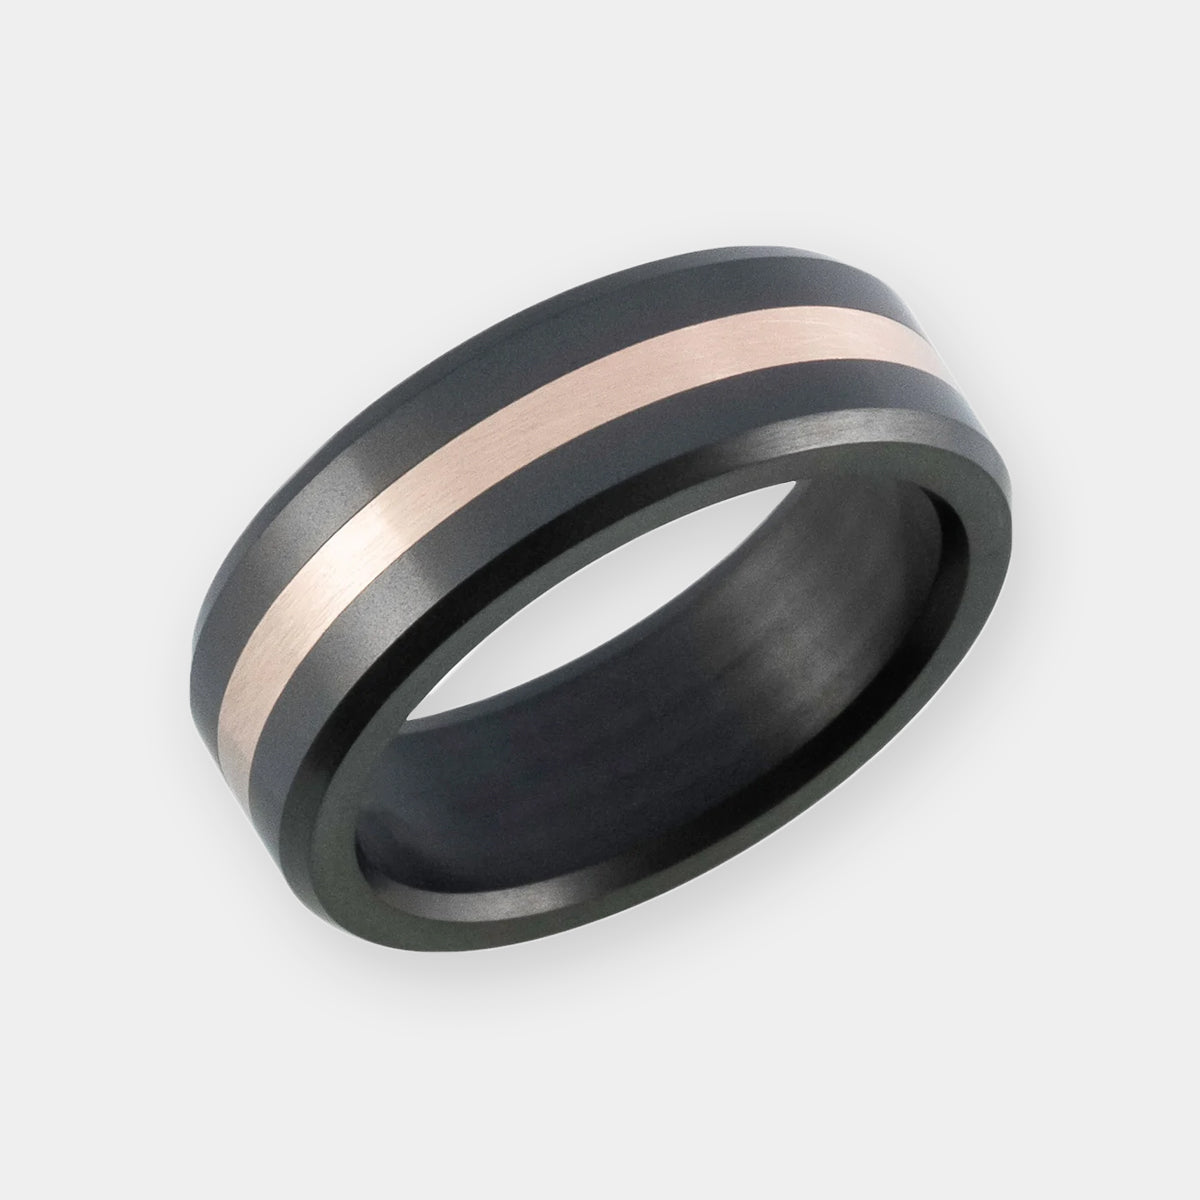 Men's Black Diamond Ring with 18k Rose Gold Inlay on a white background | Elysium ARES | Men’s 18k Rose Gold Rings | Men's Gold Wedding Ring